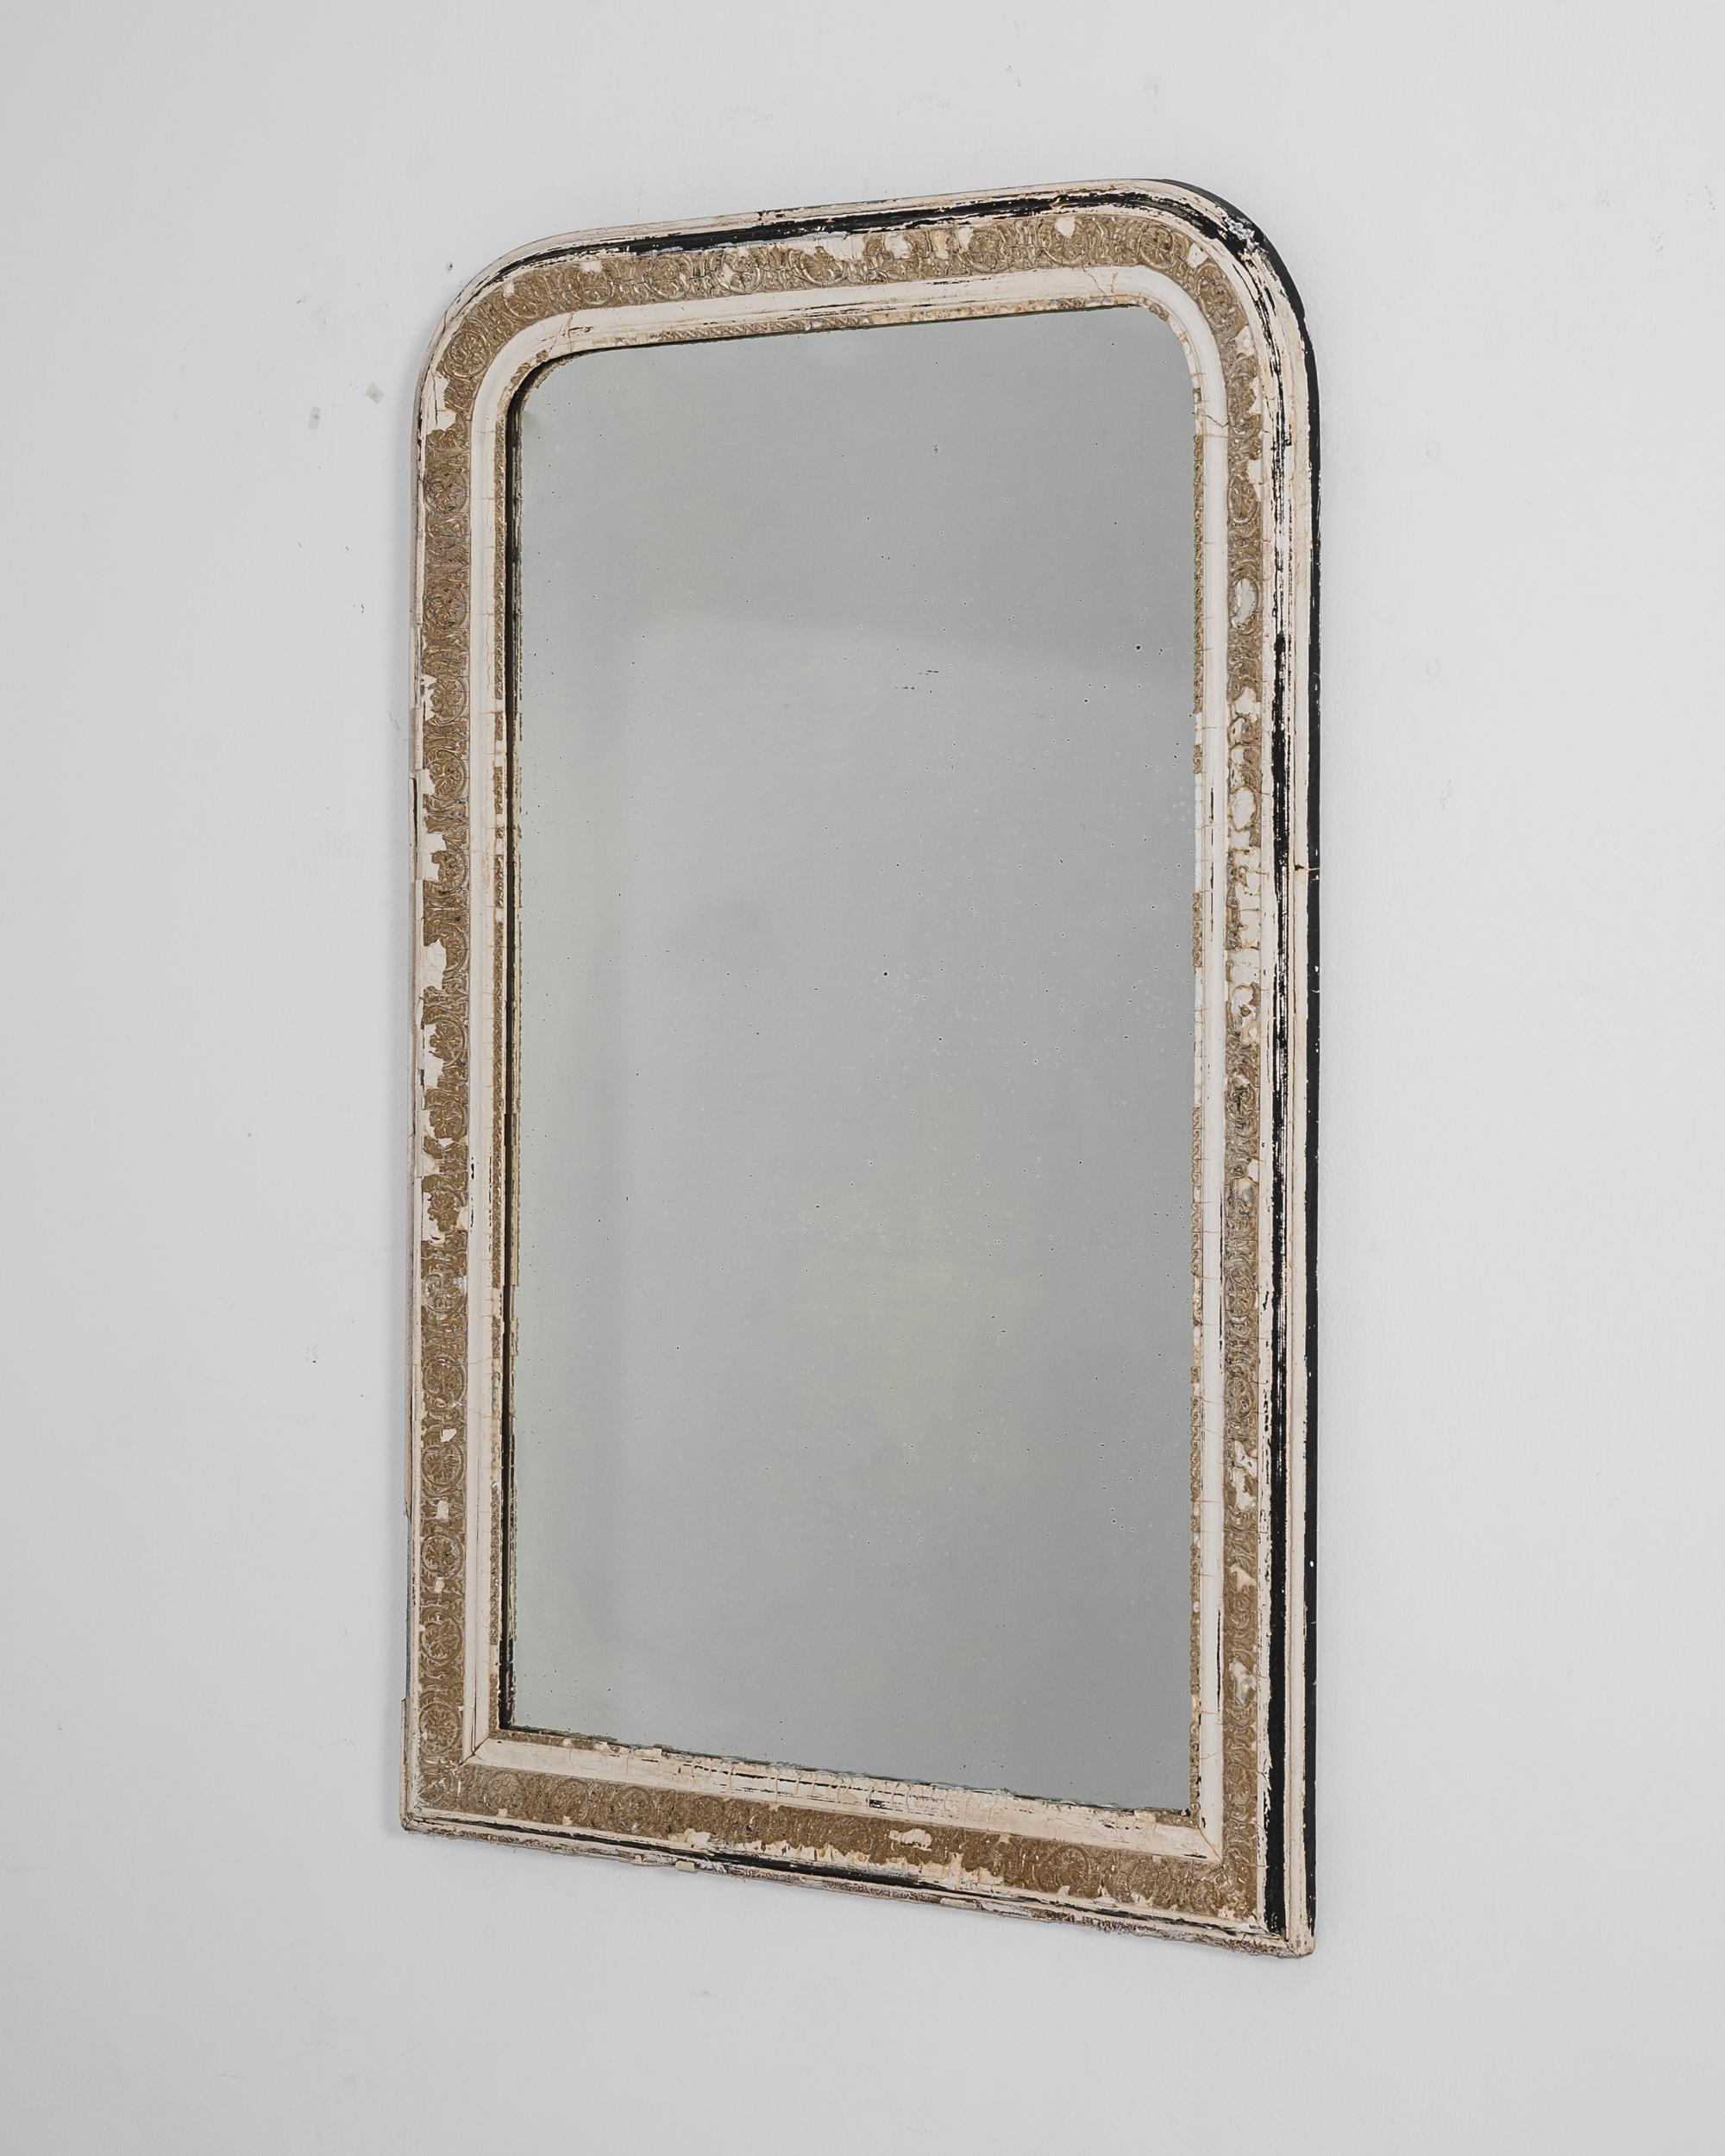 A wood and plaster frame mirror from France, produced circa 1880. A wall mounted antique mirror standing three and a half feet tall, featuring rounded corner corners at the top and floral motif reliefs around the frame. Age lines, silver spots and